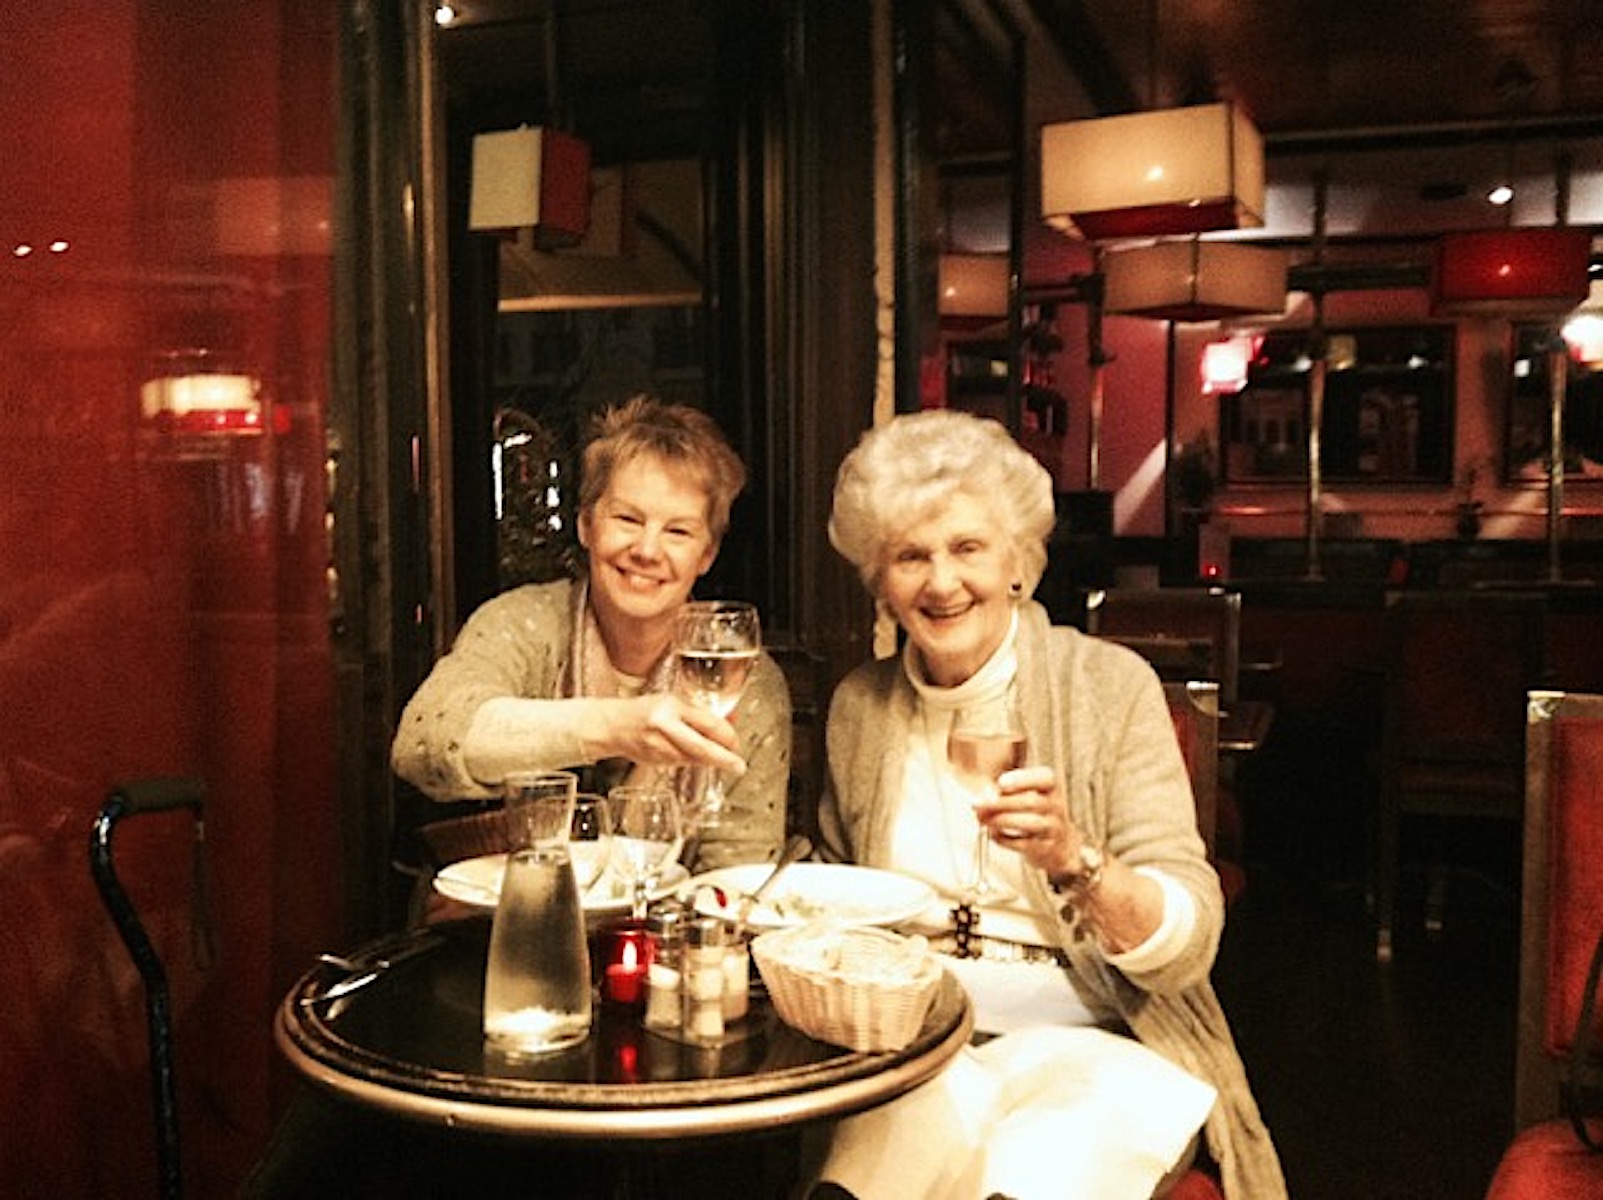 Amy Ross with her Mom at Amy’s 60th birthday celebration at their favorite bistro in Paris. Amy shares, “Travel has always been a very important part of my life.  To celebrate my 60th birthday, I lived in Paris for a month. Mom continues to be my best friend and we travel the world together. She will be 92 in July 2020, and is still going strong. She inspires me everyday.”